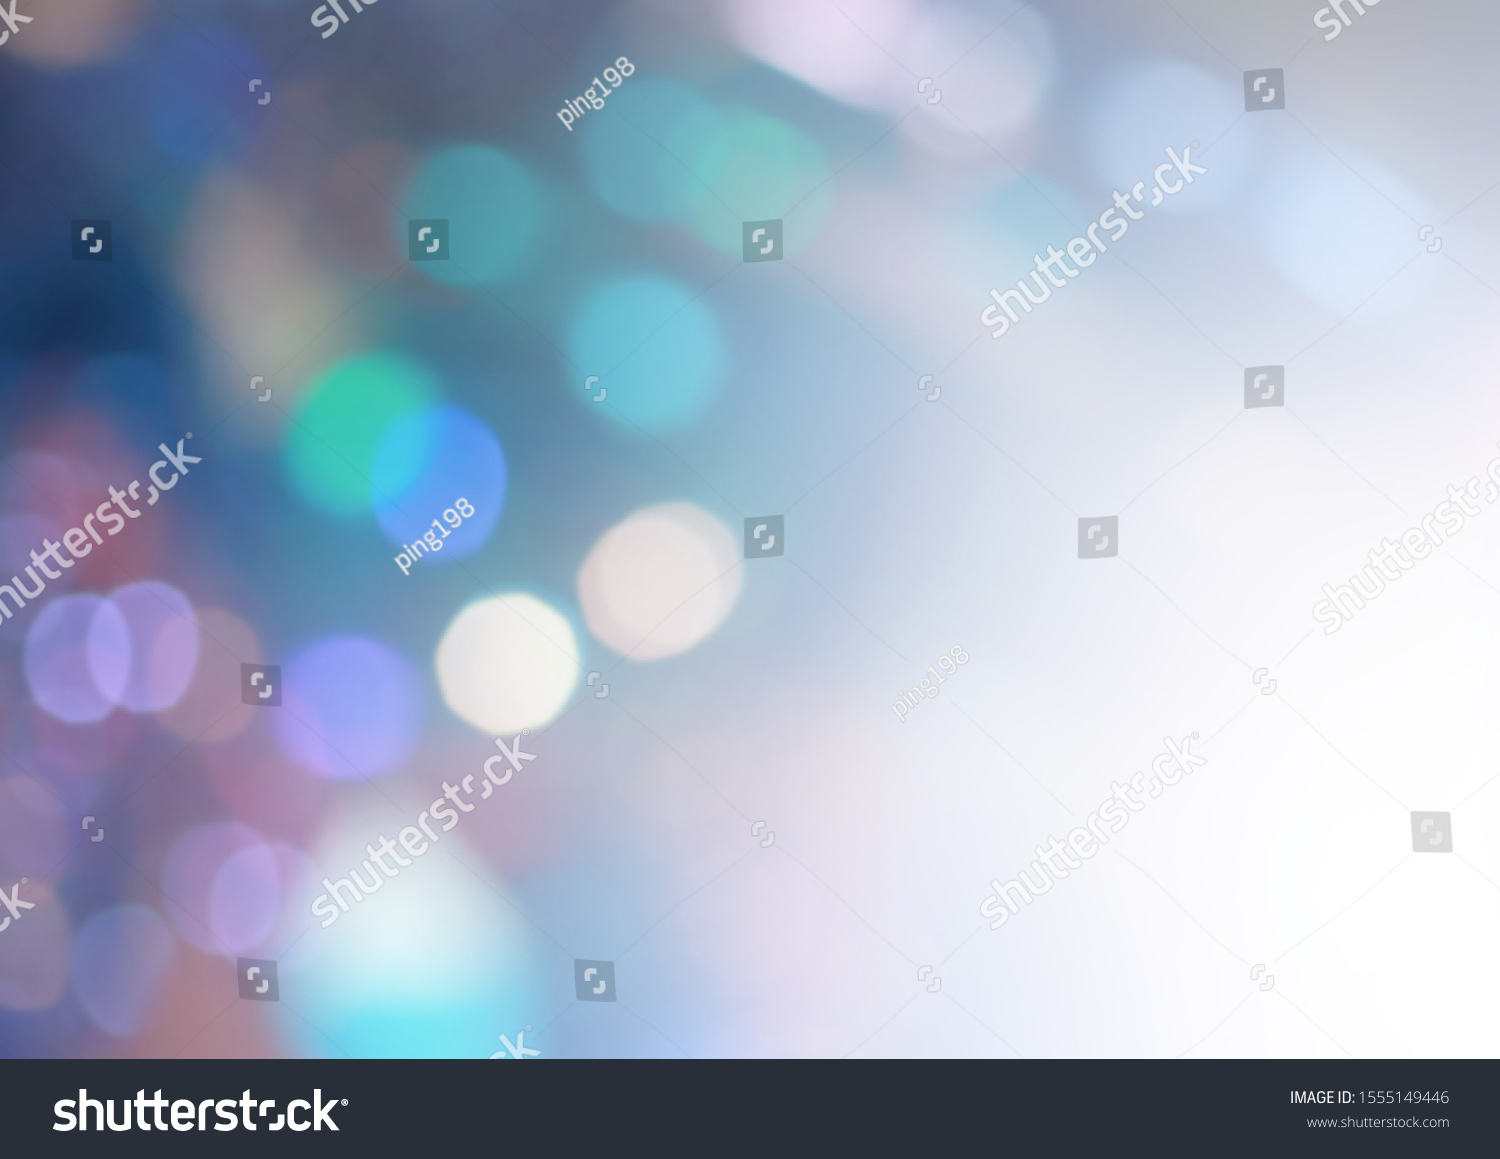 Blurred backdrop, blurred background, circle blur, bokeh blur from the light shining through as a backdrop and beautiful computer screen images. #1555149446